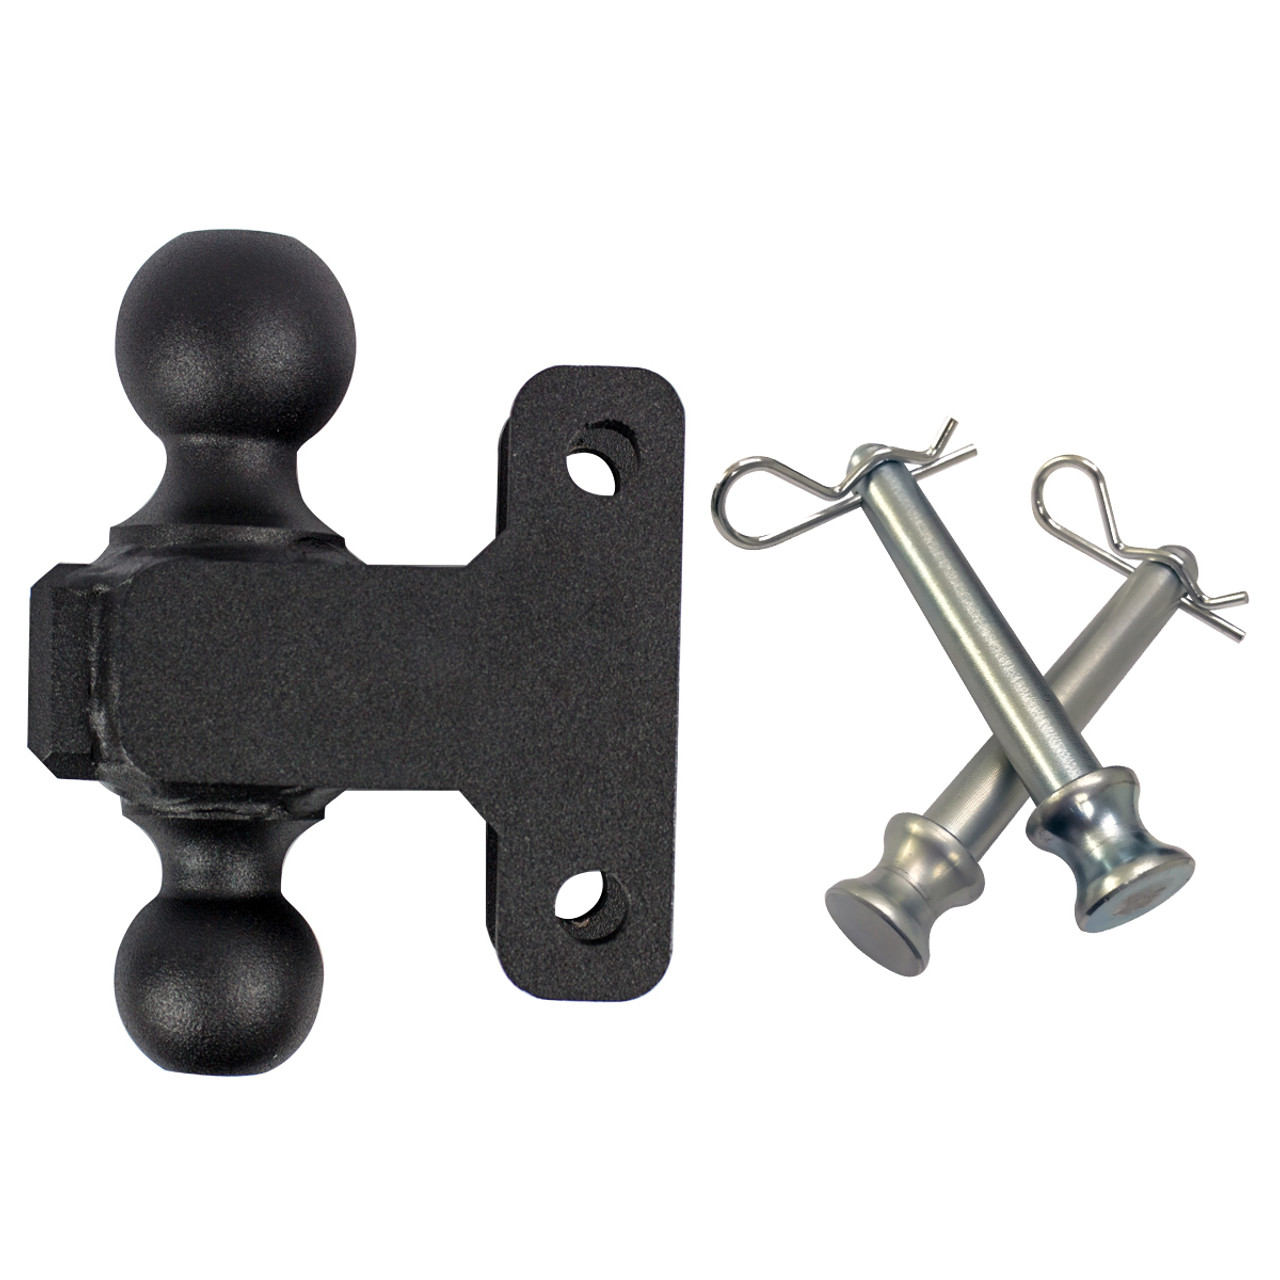 3.0” Extreme Duty 12” Drop/Rise Trailer Hitch